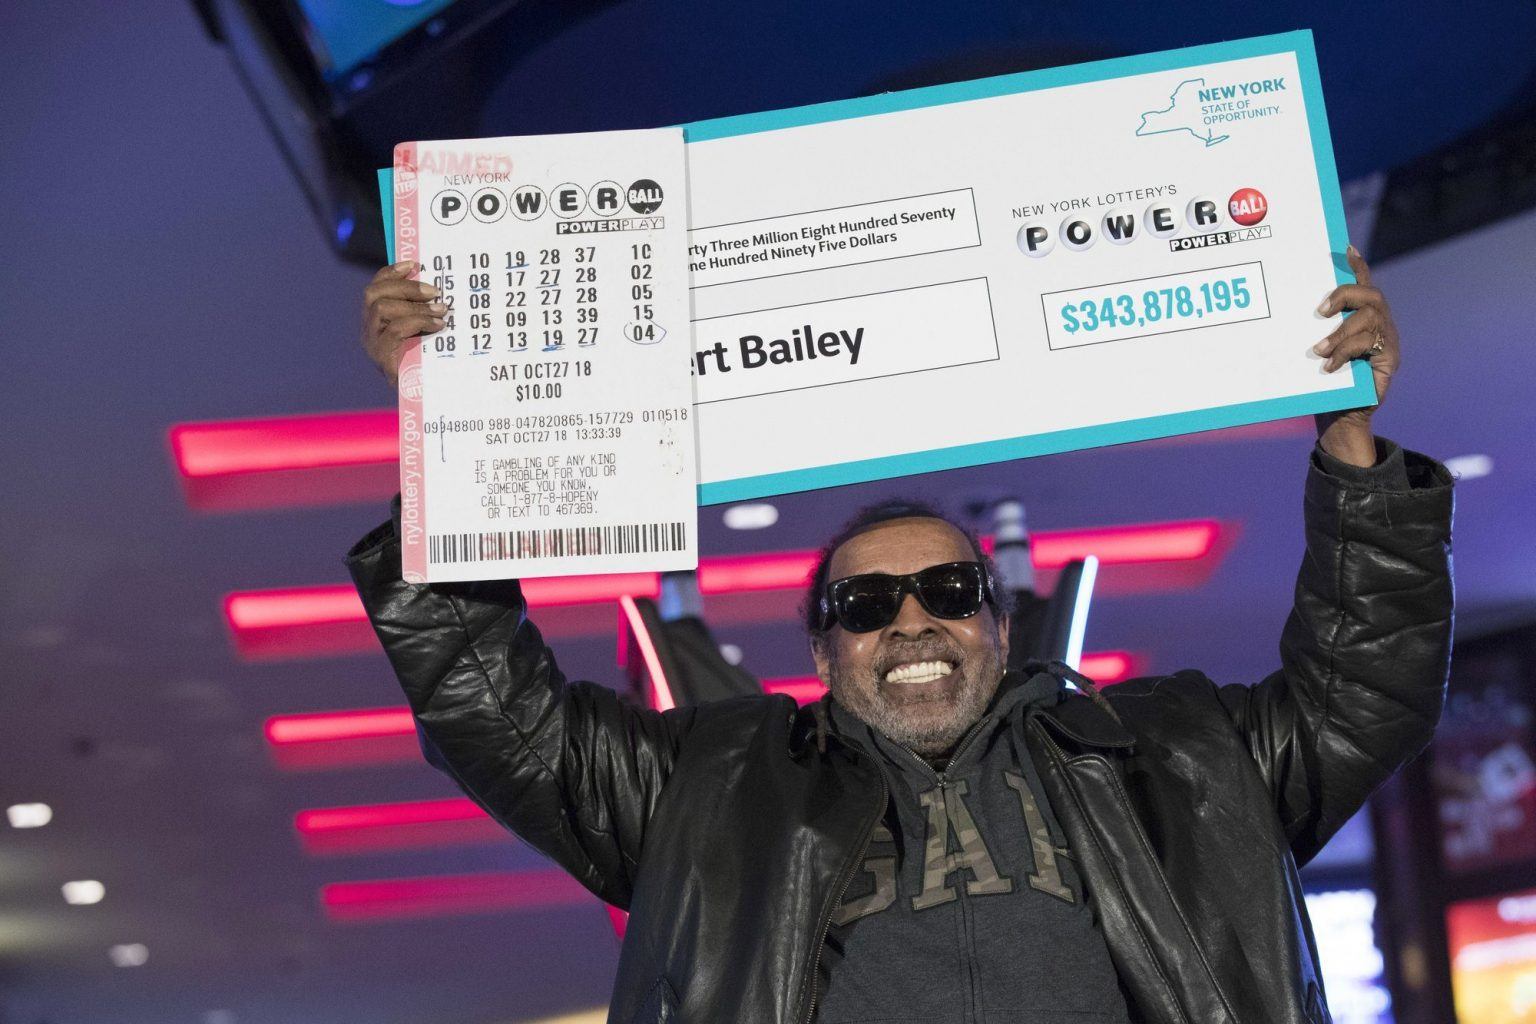 powerball-winner-to-test-luck-again-says-he-s-going-to-las-vegas